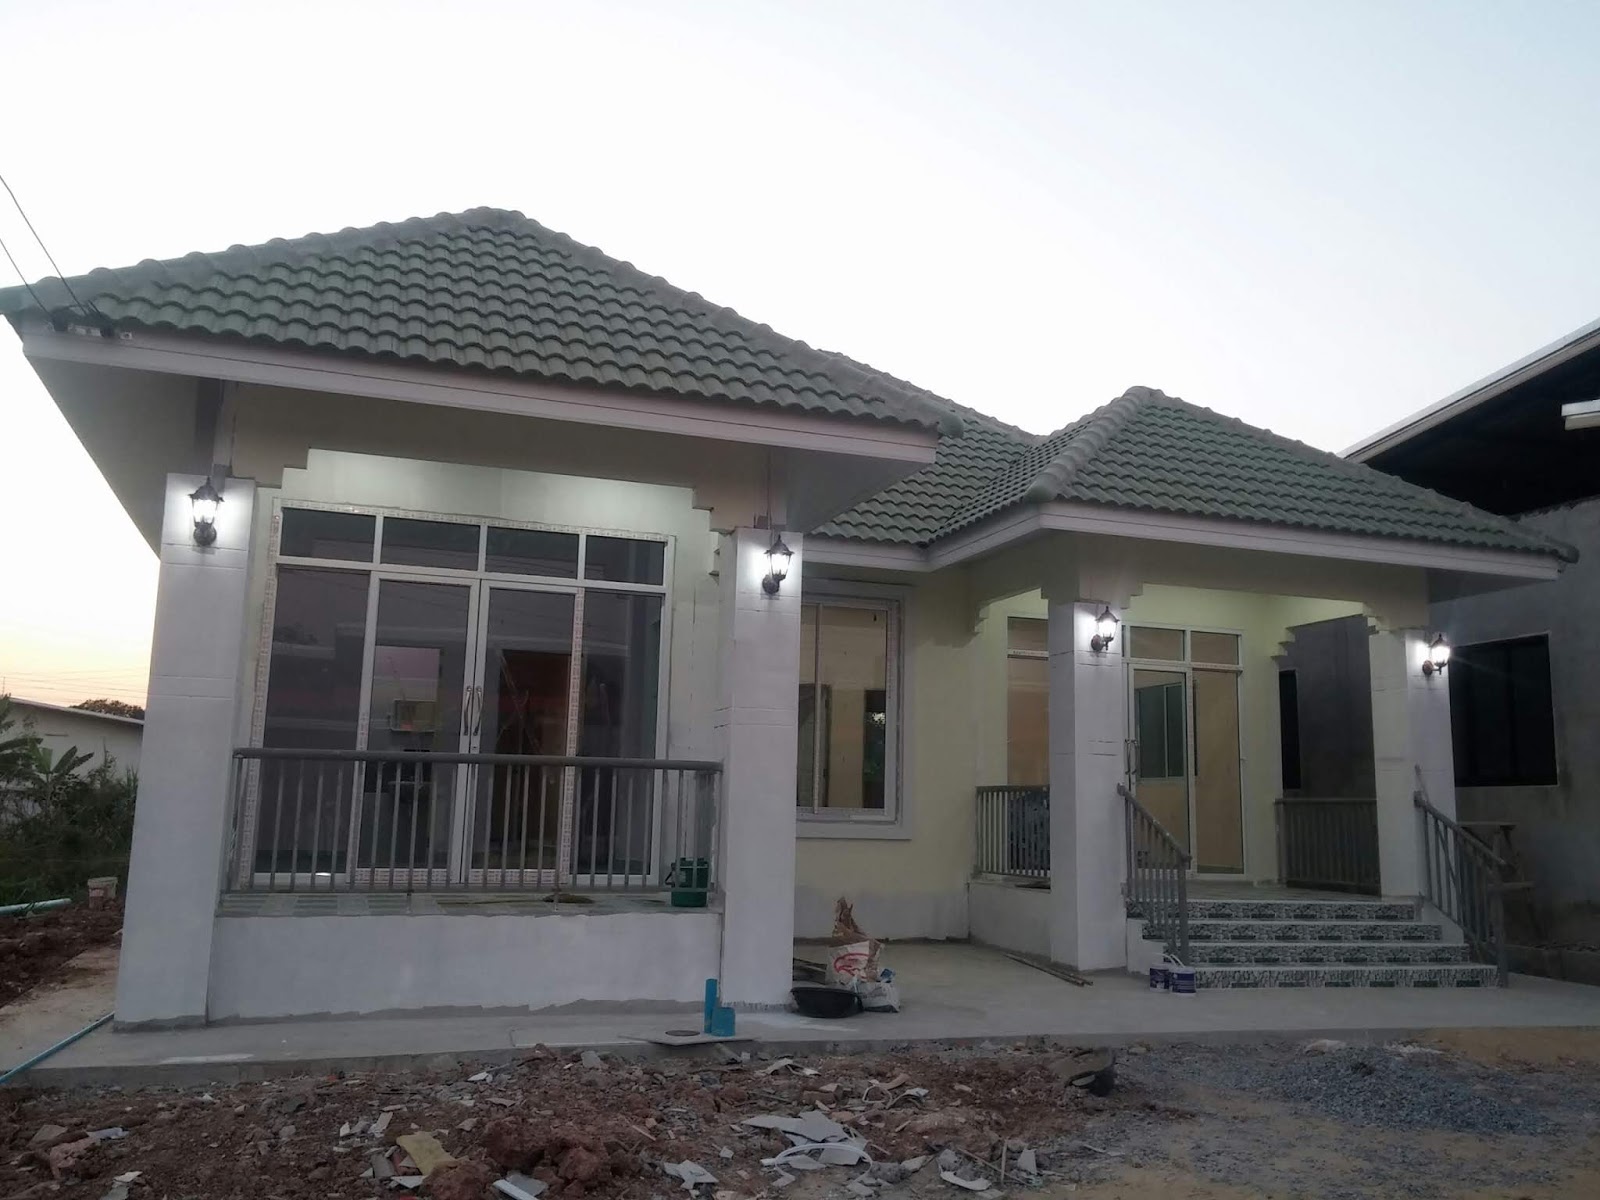 A single-storey house is a popular home choice. It is simple, economical, and convenient for the young and old alike. These are the examples of single-storey houses that consists of 3 bedrooms, 3-4 bathrooms, living area and a kitchen., 